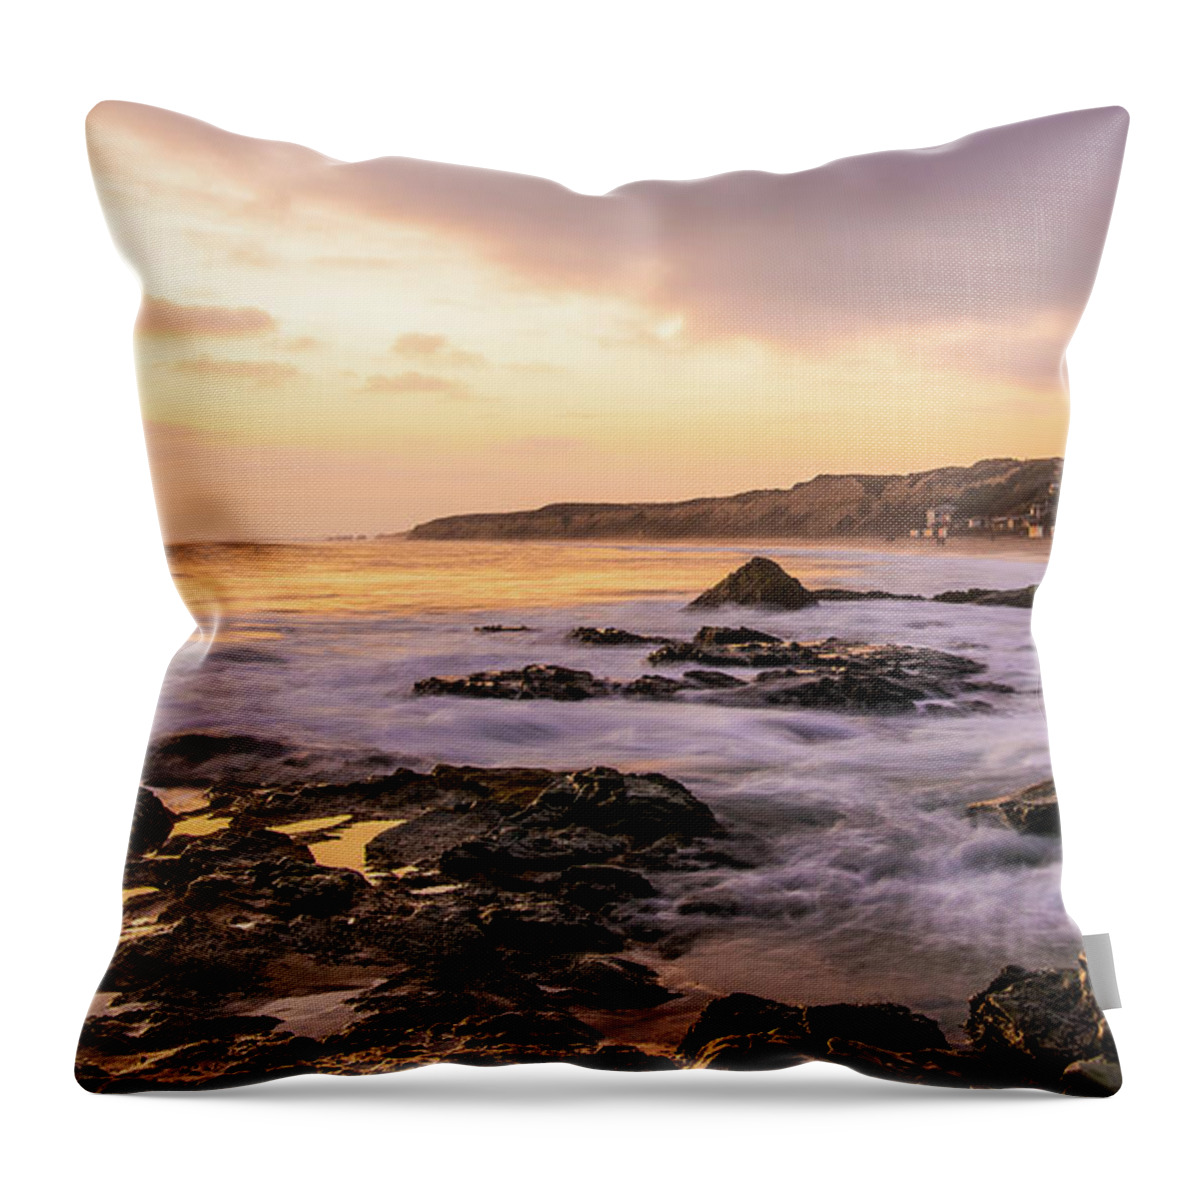 Local Snaps Photography Throw Pillow featuring the photograph Golden Sunset on Seaside Community by Local Snaps Photography